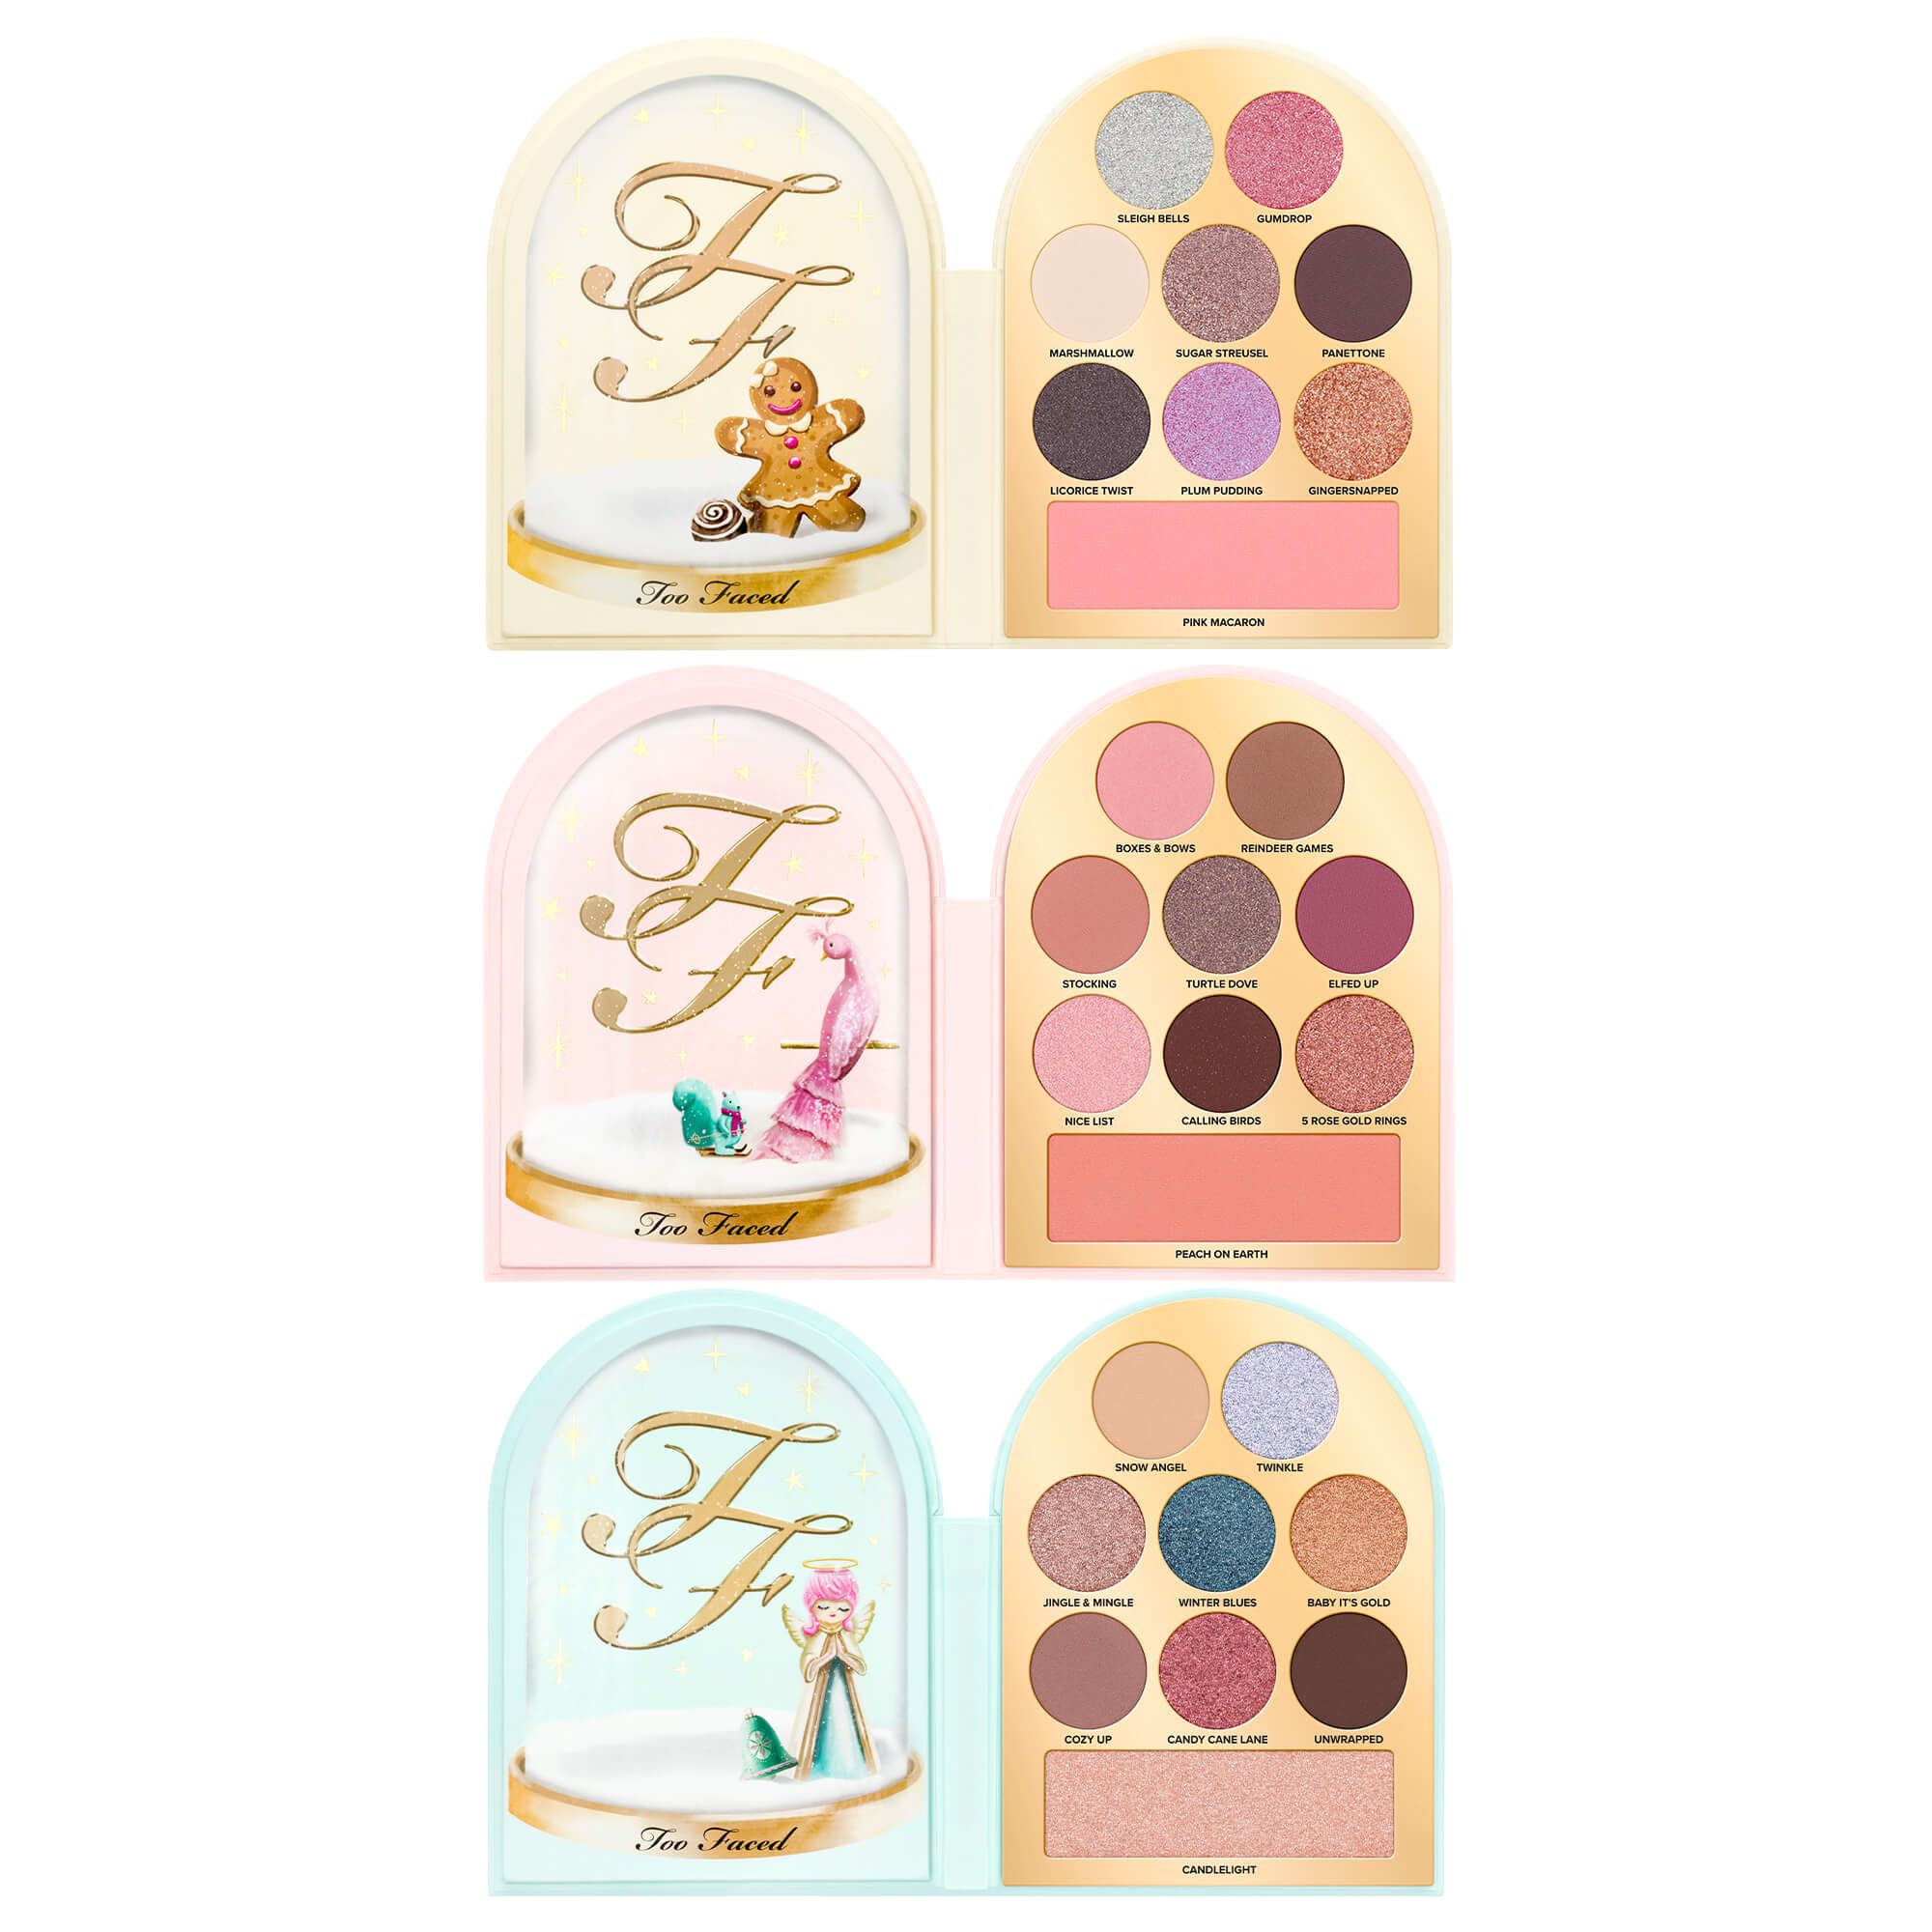 Limited Edition Three-Piece Palette Gift Set | Too Faced US